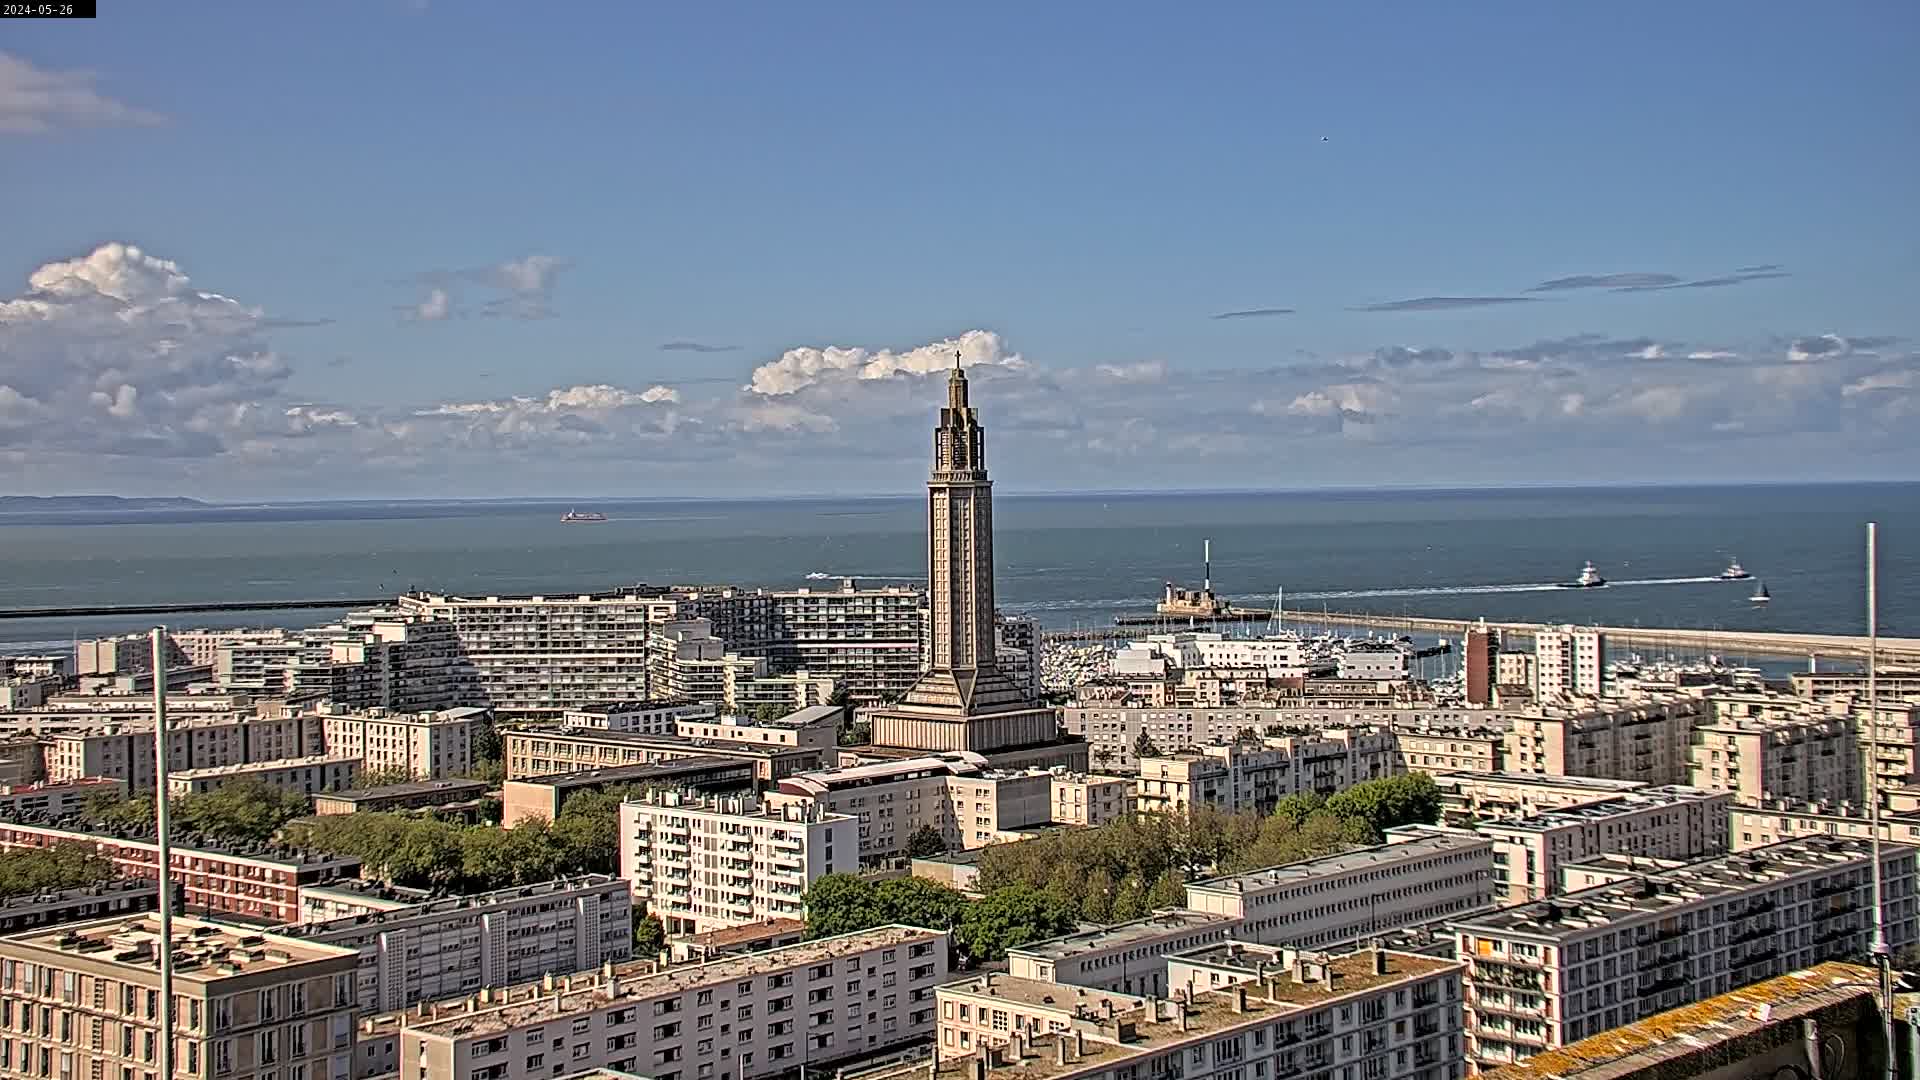 Le Havre Gio. 11:10